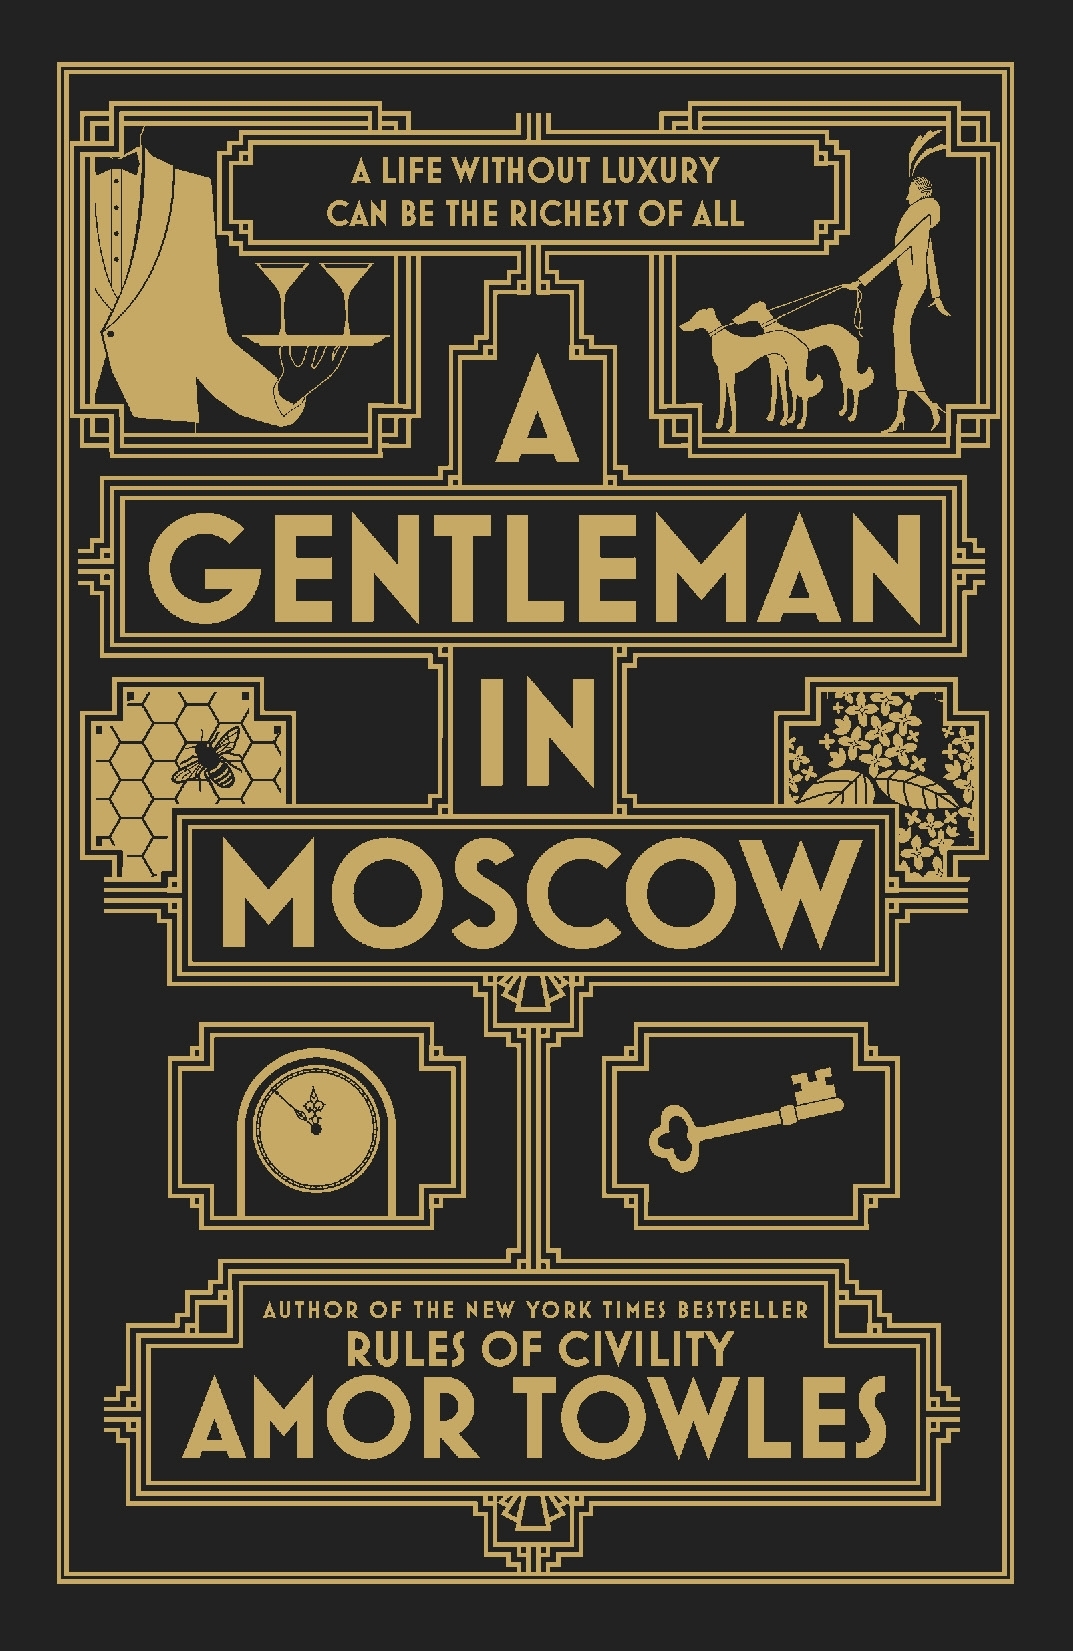 book review for a gentleman in moscow